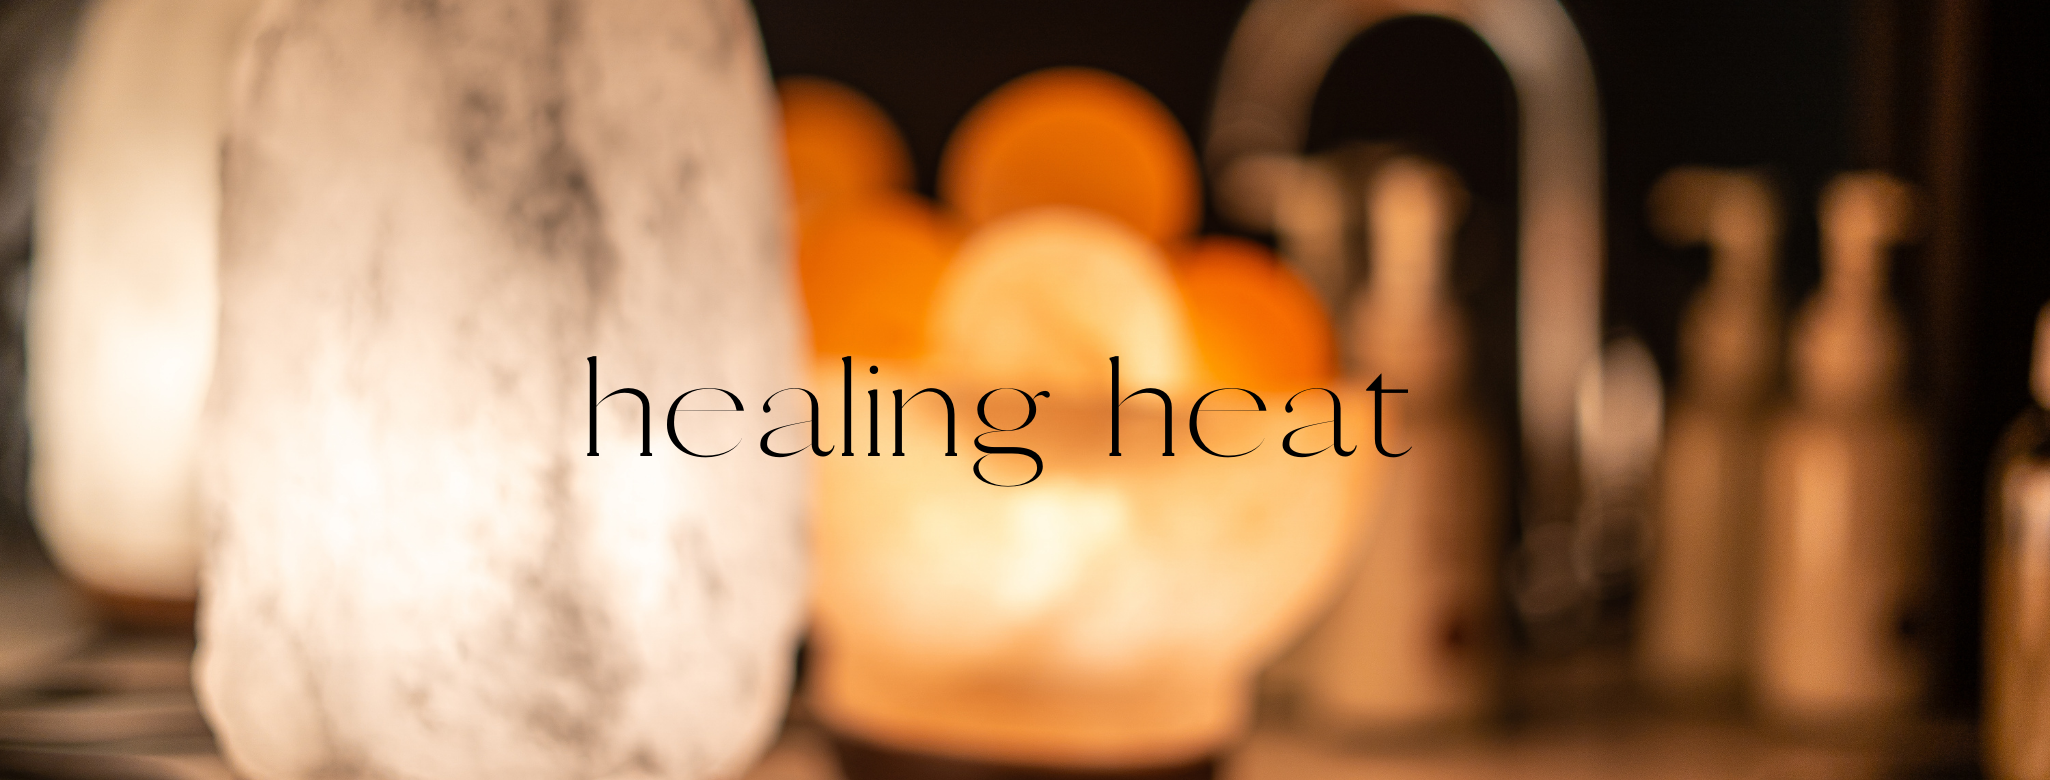 Healing Heat at Home – Self Care Routine